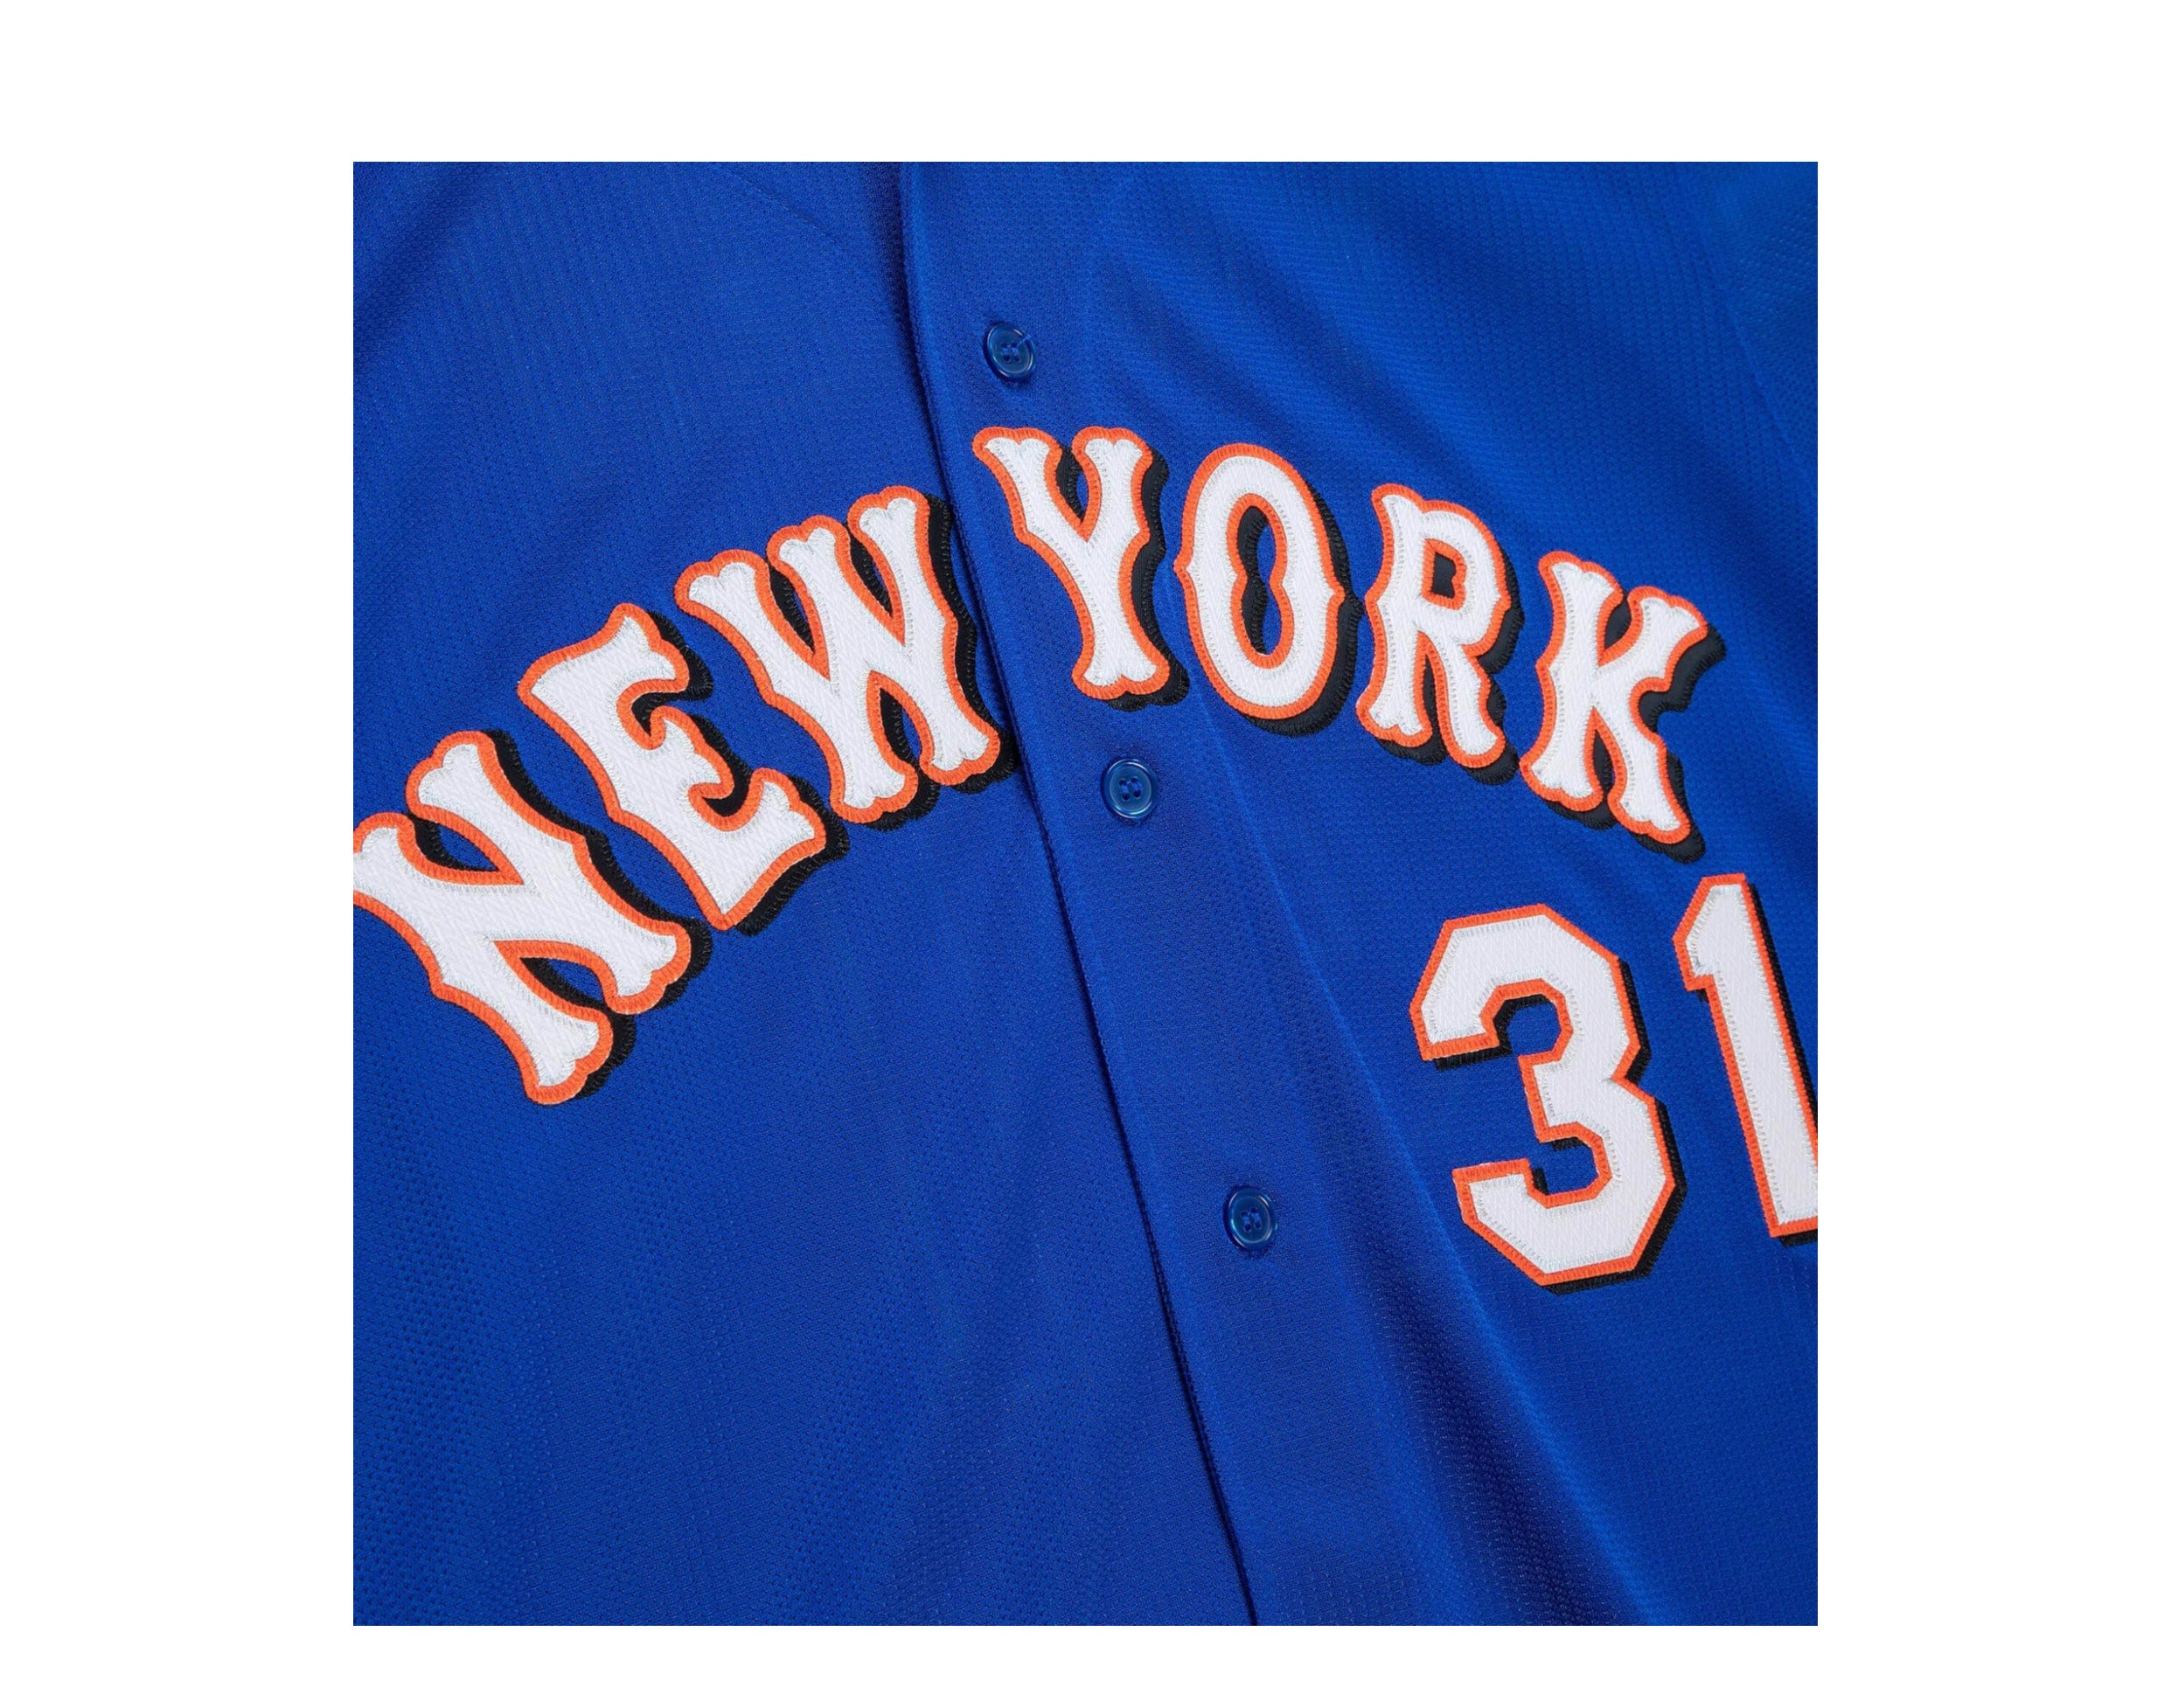 Mitchell & Ness Authentic Mike Piazza New York Mets 2004 BP Jersey - Orange - L